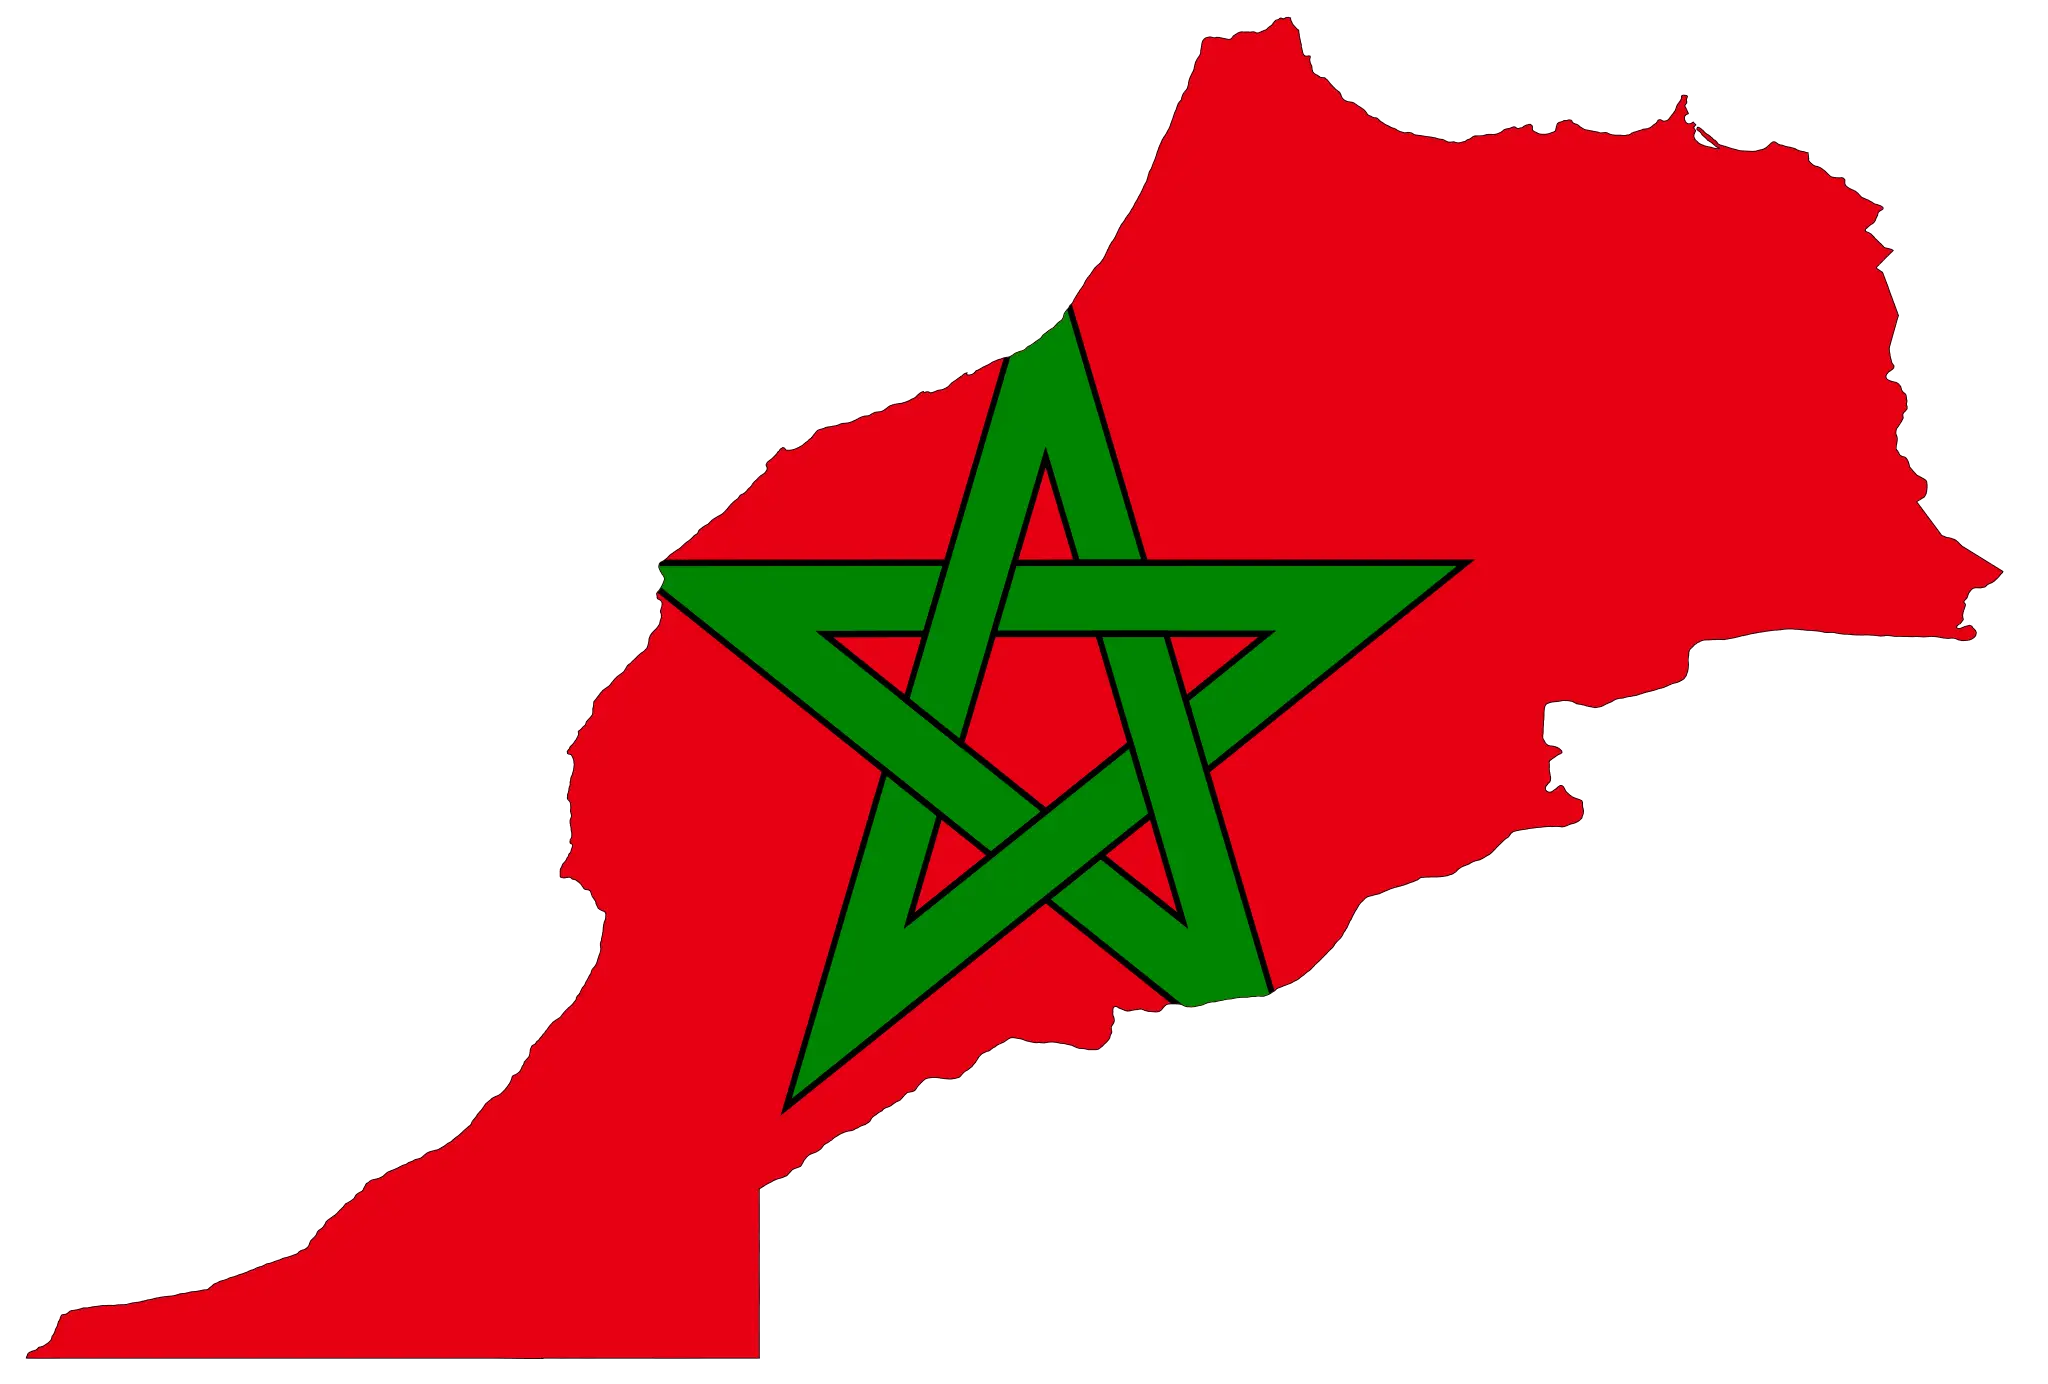 morocco_flag_map.png